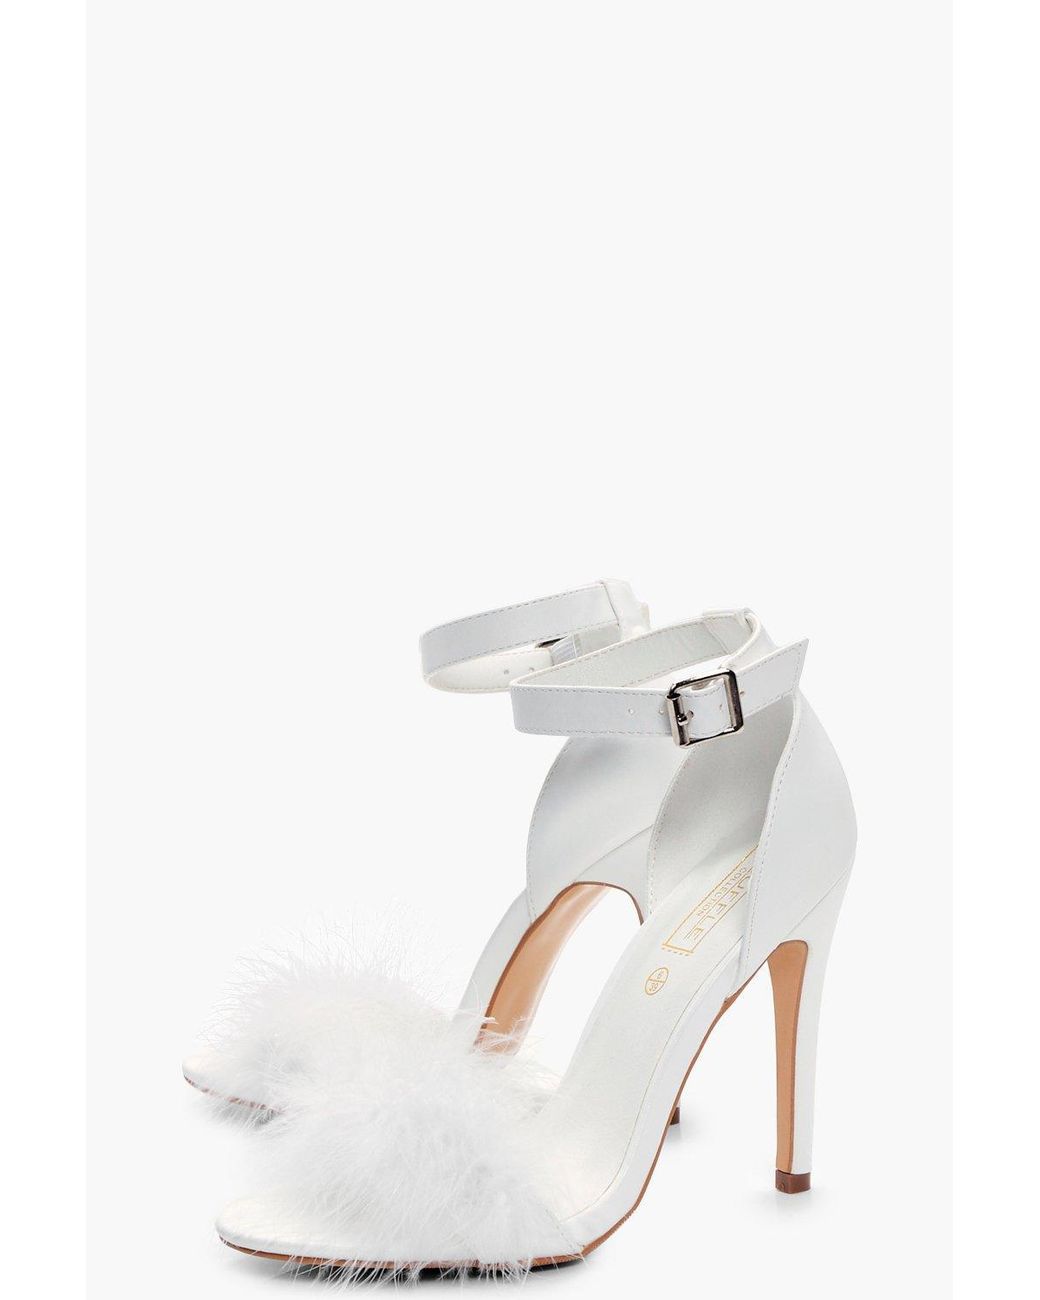 Boohoo Feather Trim Two Part Heels in White | Lyst